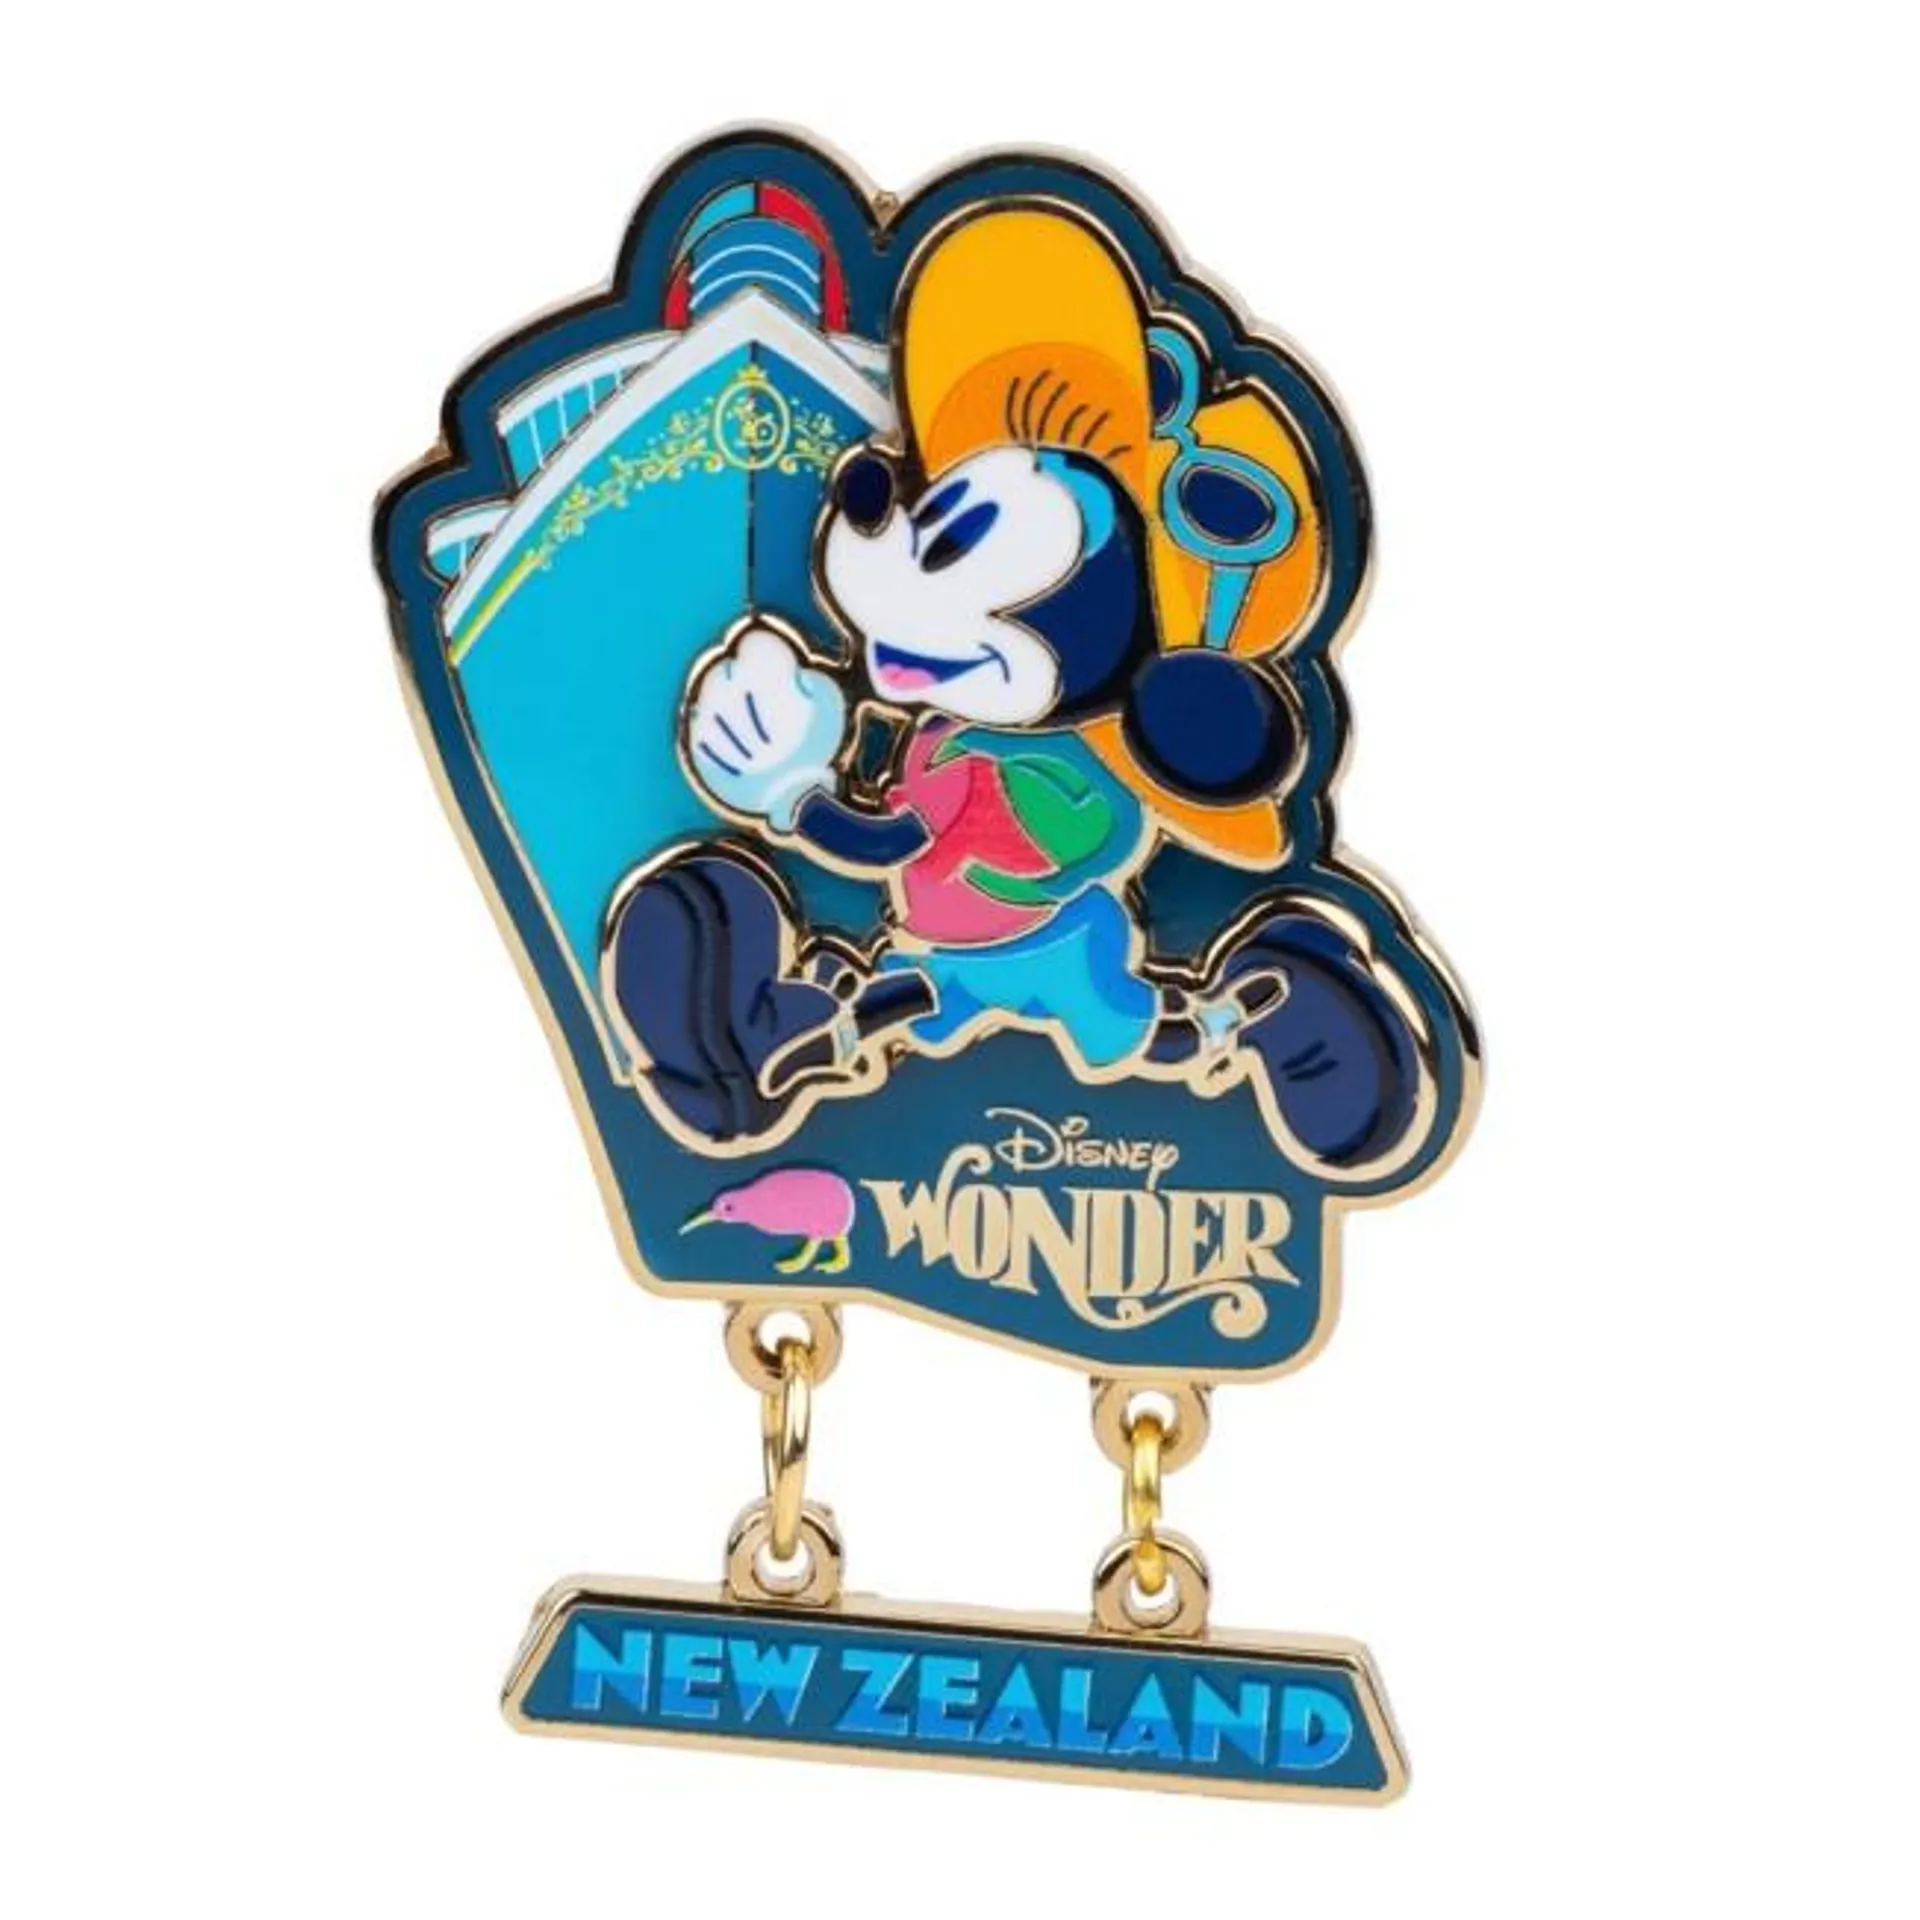 Disney Cruise Line Limited Release Pin, New Zealand